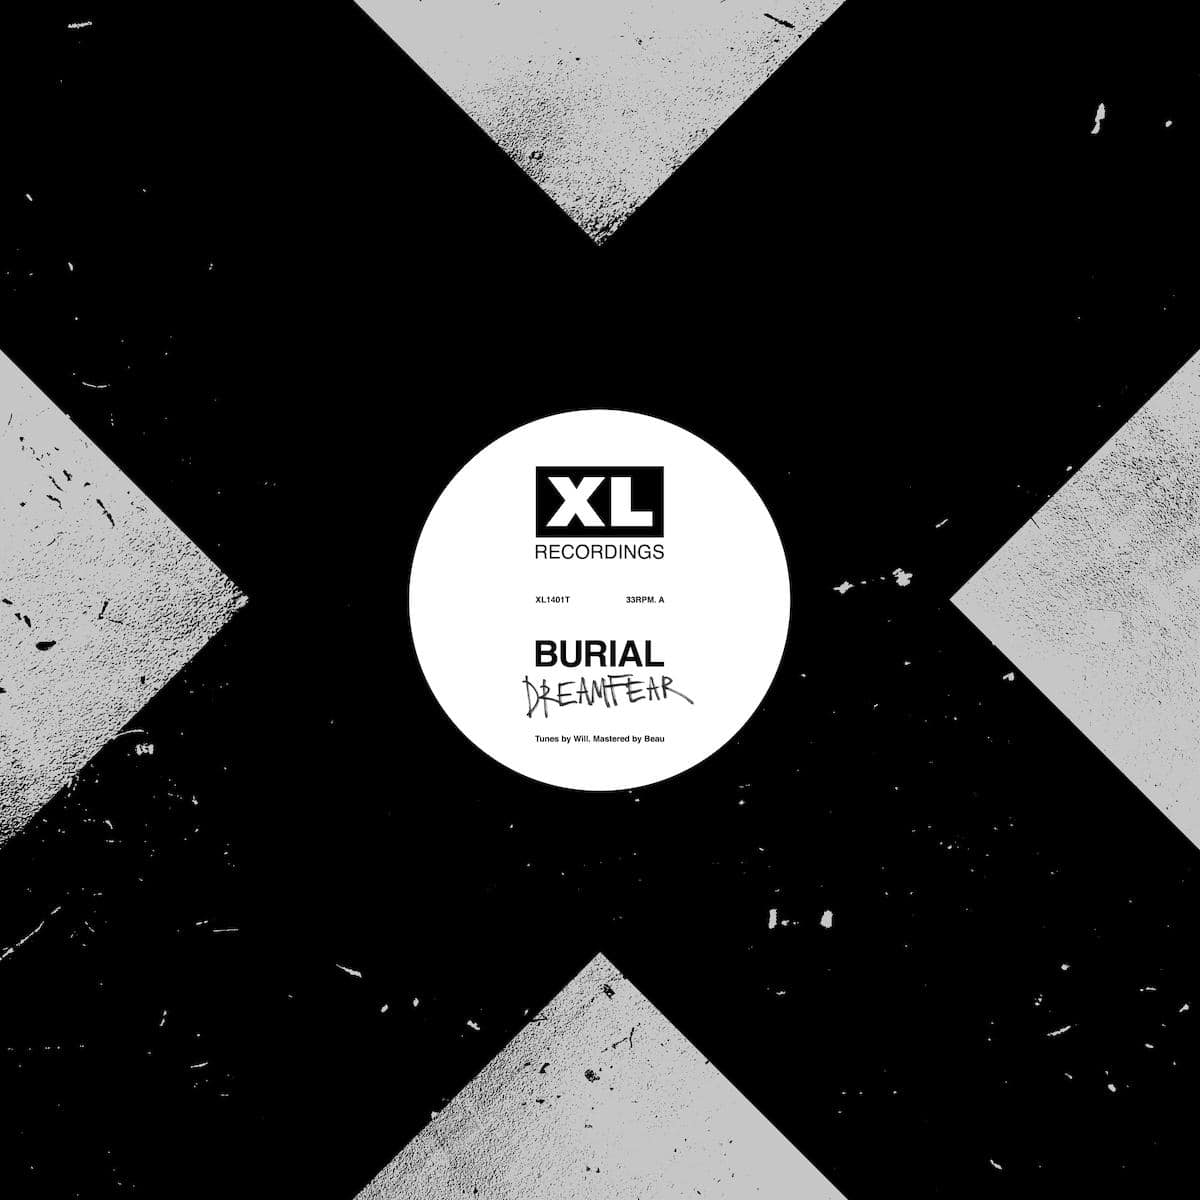 Burial - Dreamfear/Boy Sent From Above (12" Vinyl EP)(XL Recordings)